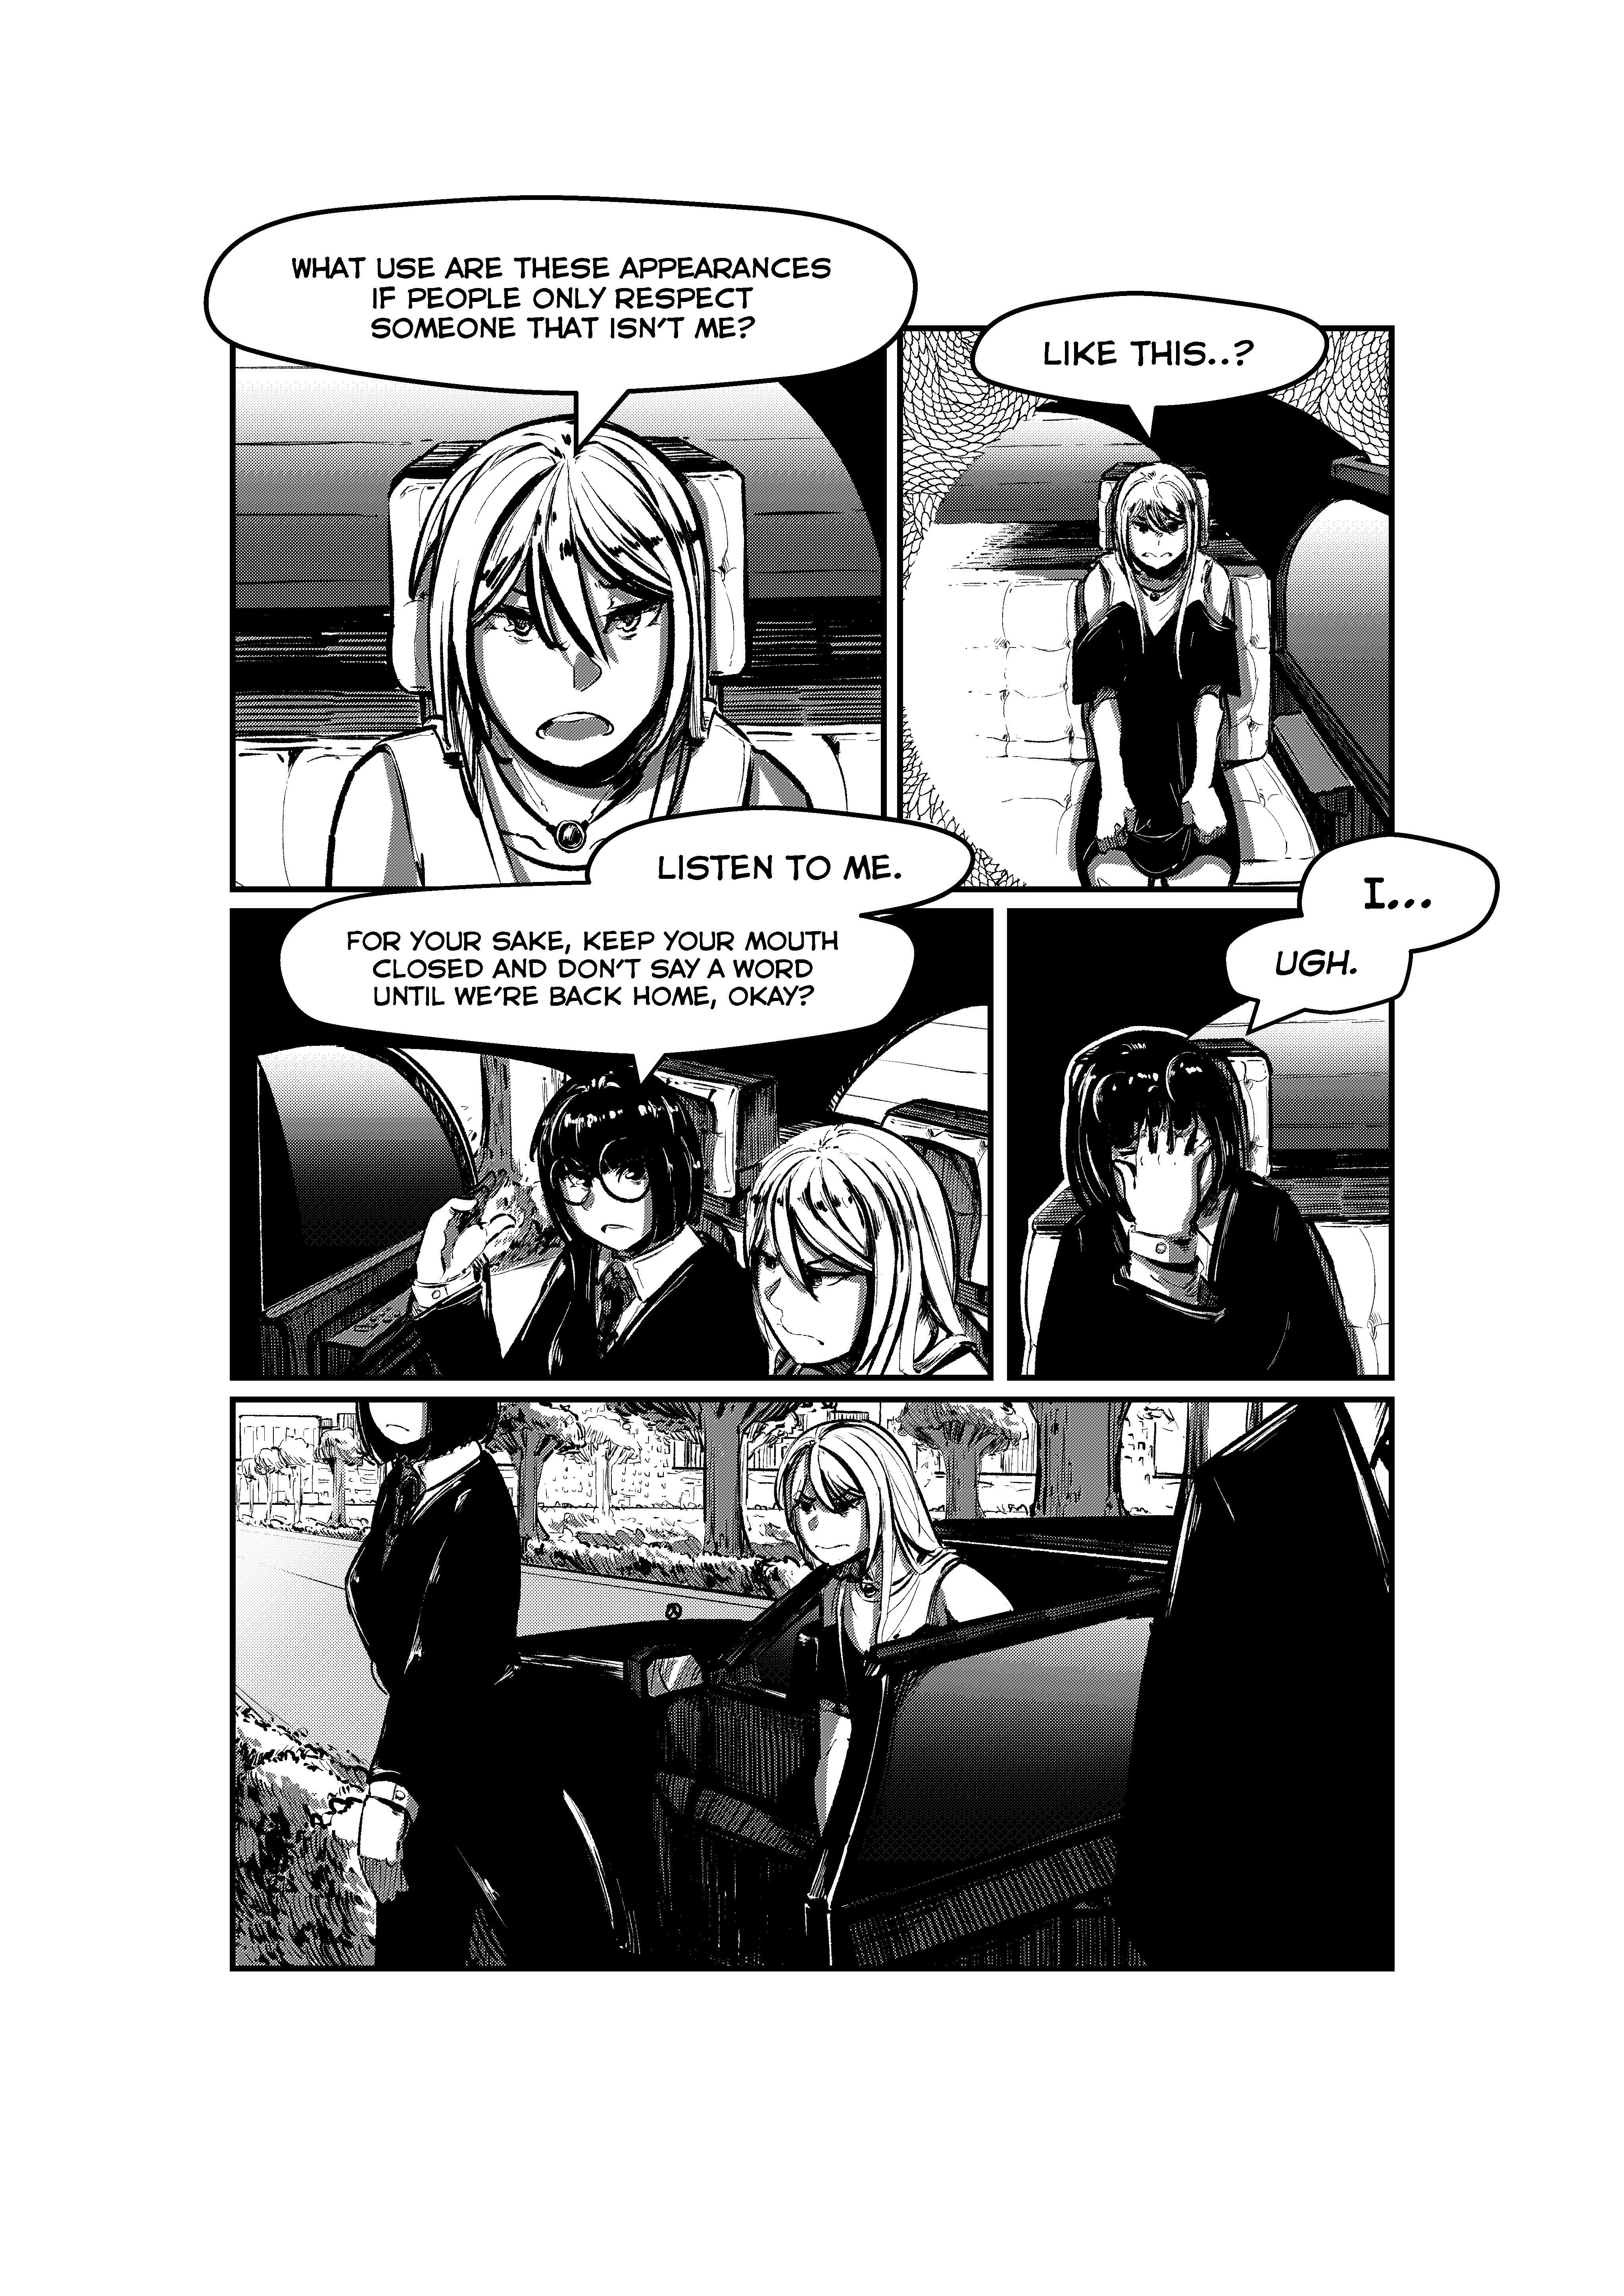 Opposites In Disguise Vol.1 Chapter 12: A Little Negotiation page 11 - Mangakakalots.com